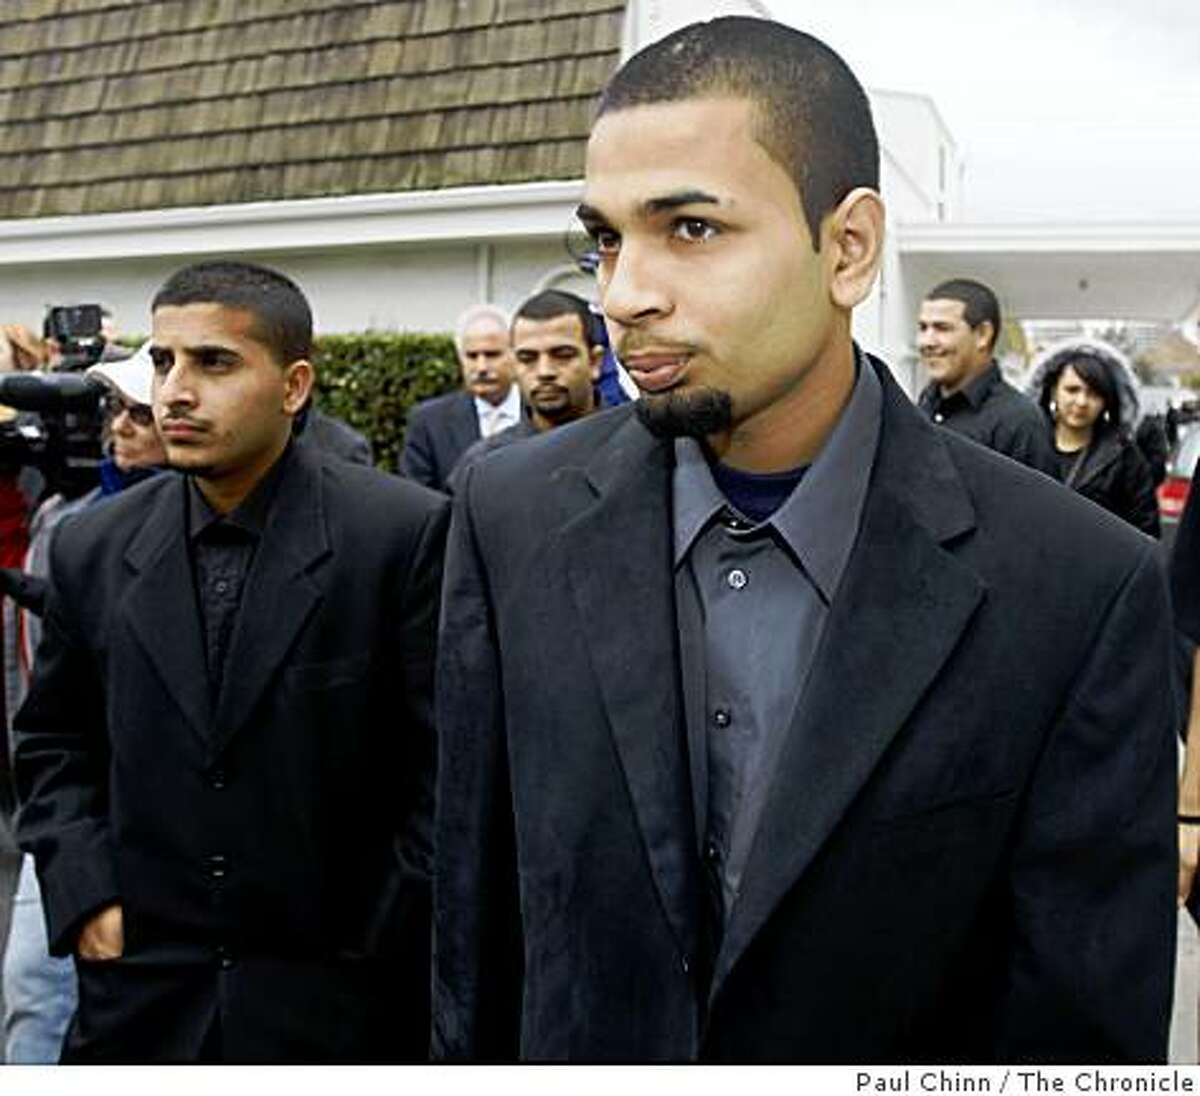 Paul Dhaliwal (right) one of the two brothers injured in the tiger attack, leaves the funeral service for 17-year-old Carlos Sousa, Jr. in San Jose, Calif. on Tuesday, Jan. 8, 2008. Sousa was killed in the Christmas Day tiger attack at the San Francisco Zoo